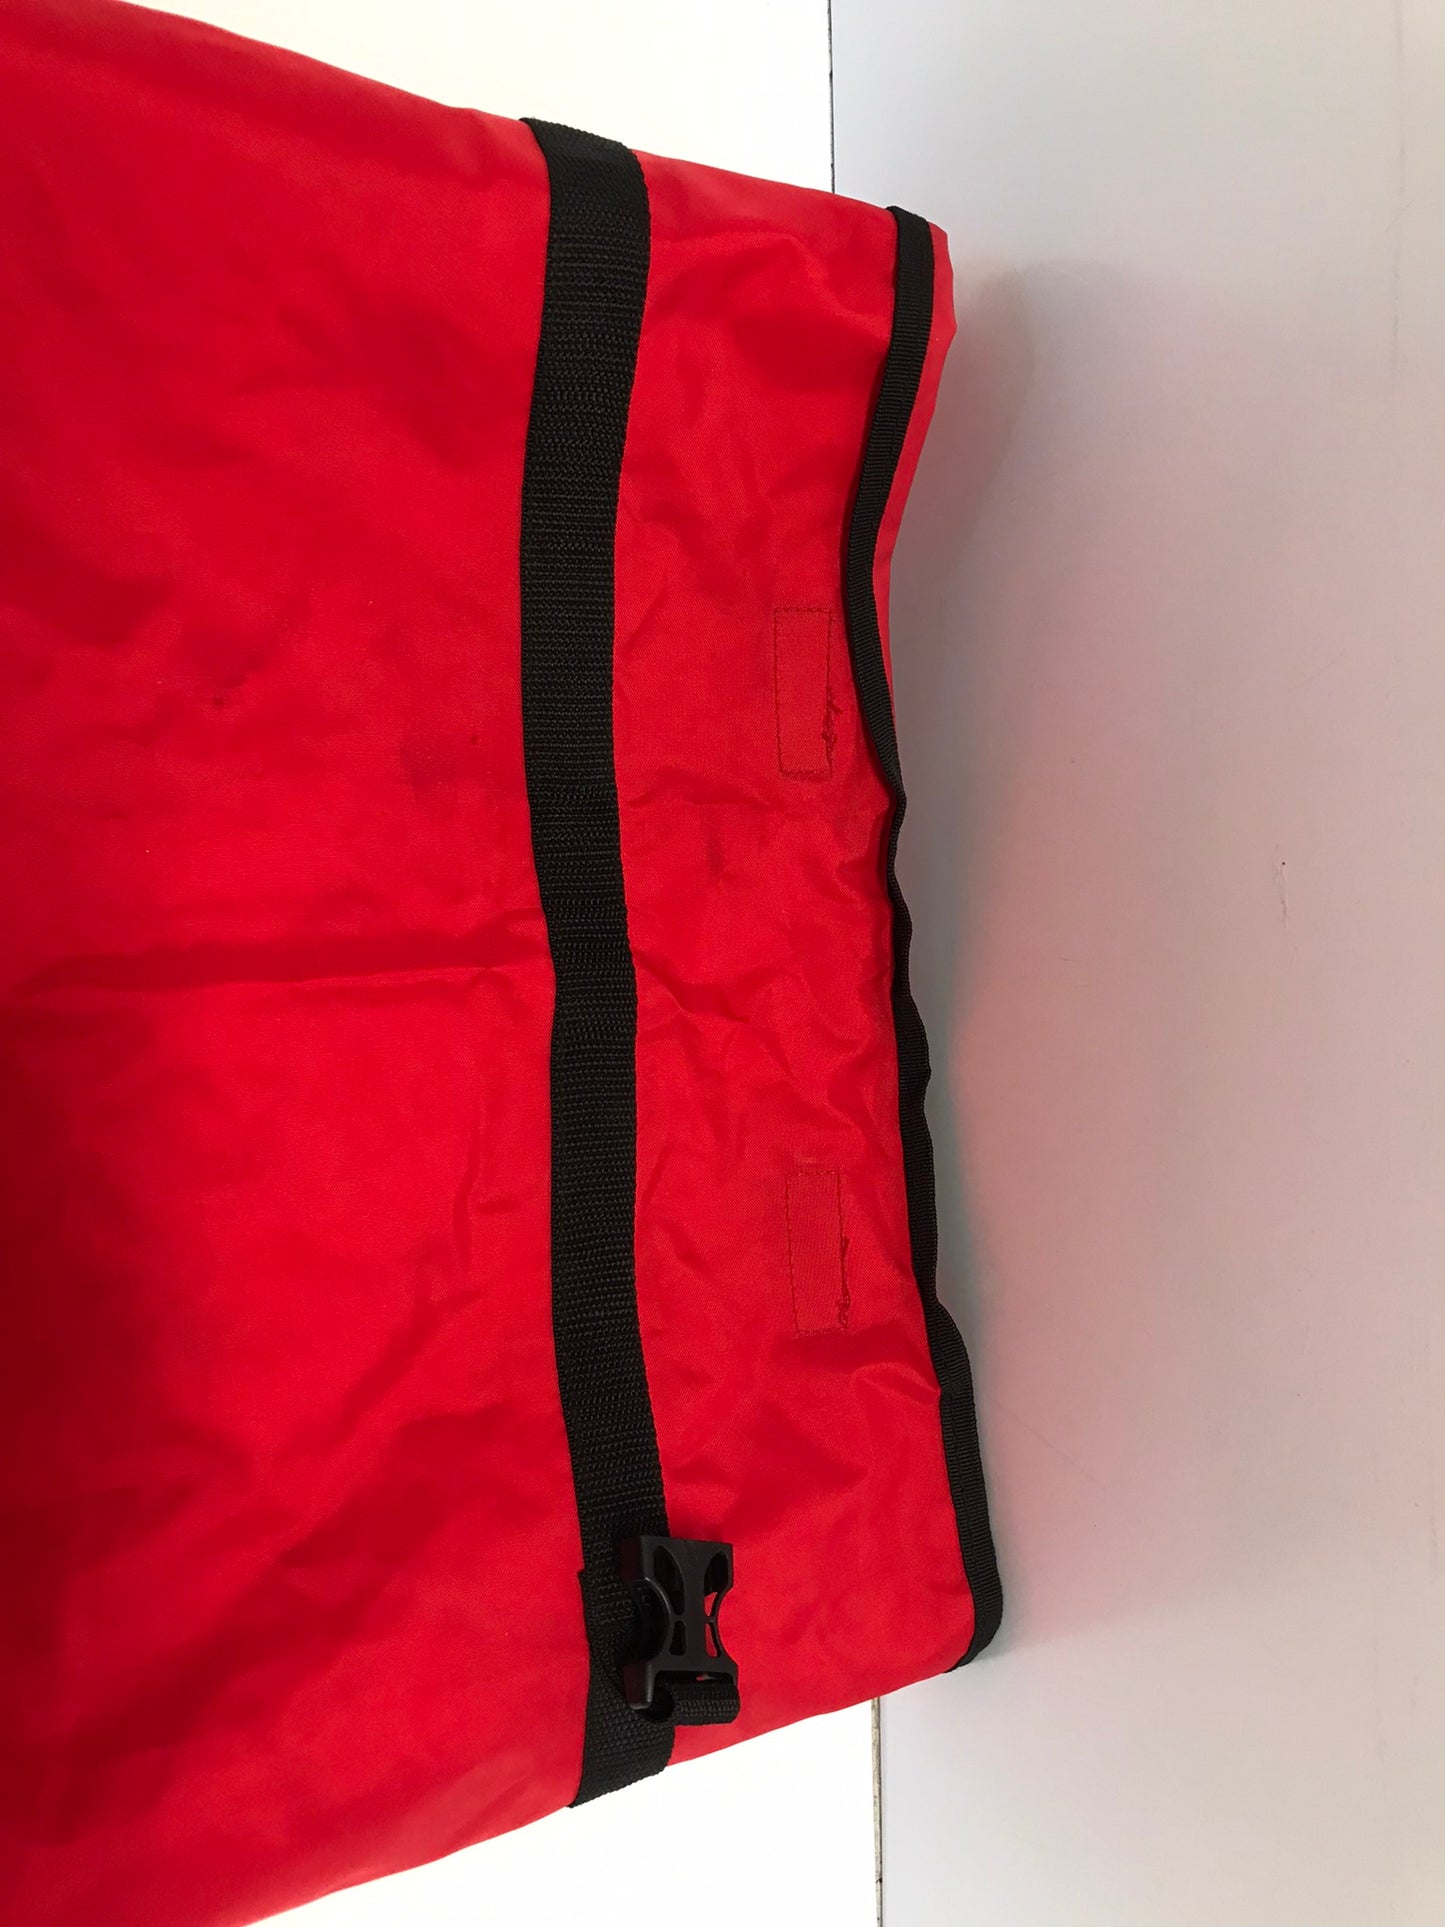 Camping Fishing Kayaking Canoe World Famous Dry Sac 12 inches Wide24 inch Long 2 Buckle Close Top Like New Red Black